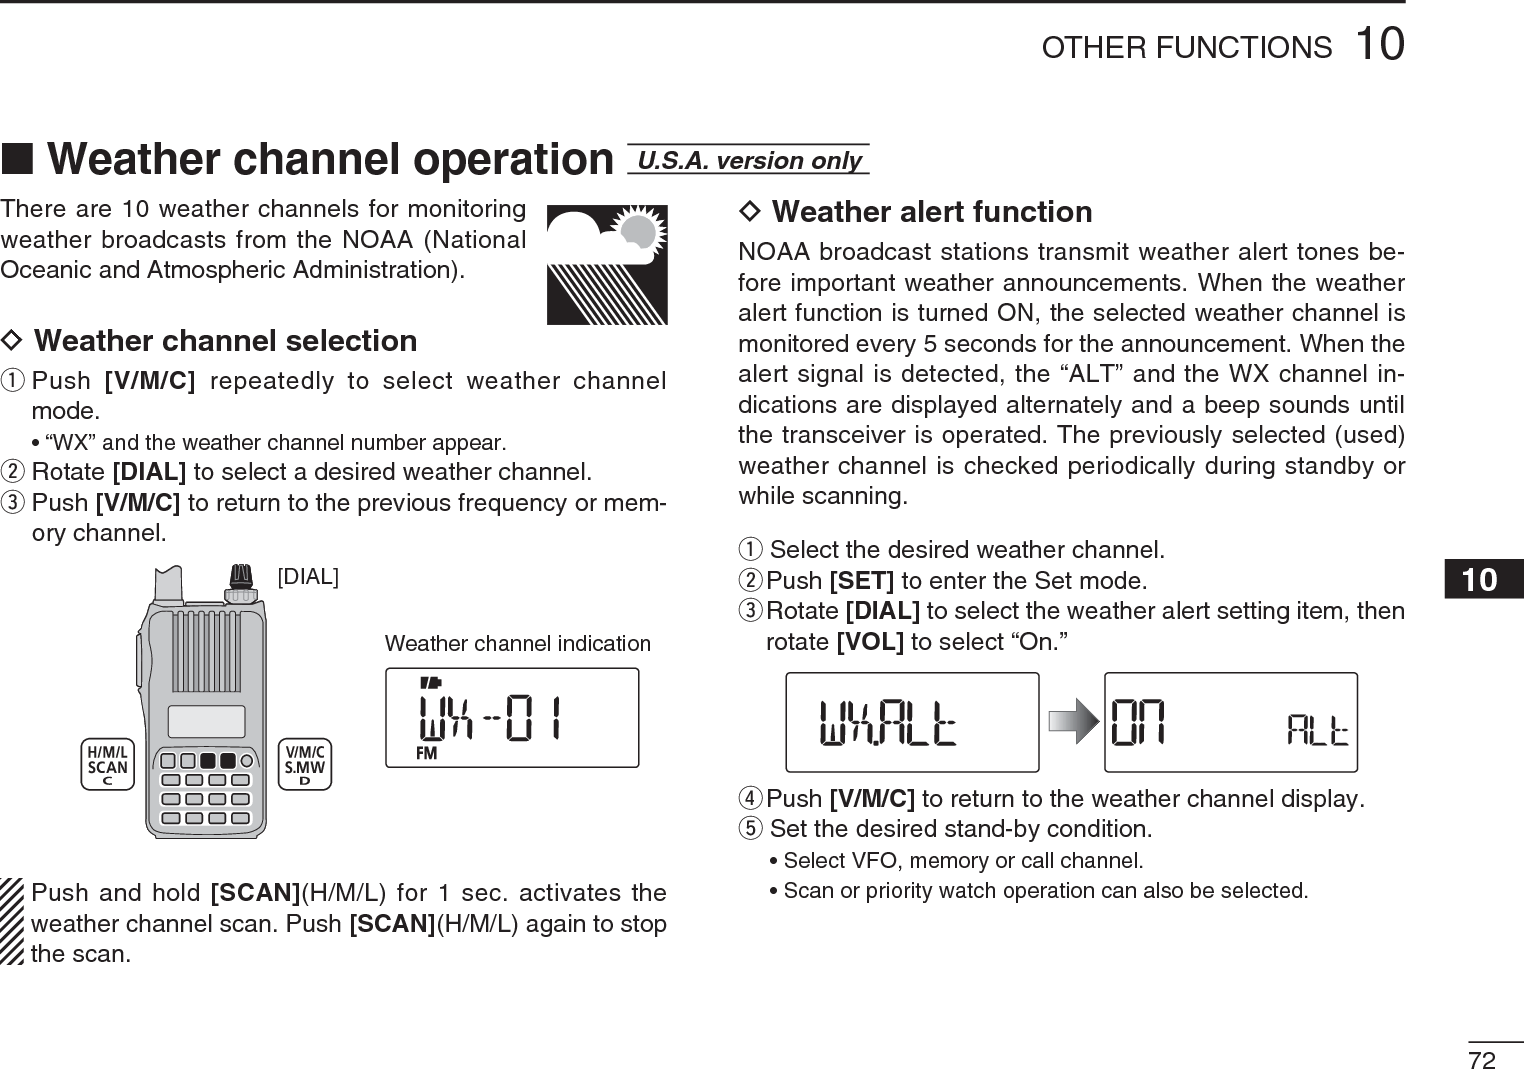 7210OTHER FUNCTIONS12345678910111213141516171819There are 10 weather channels for monitoring weather broadcasts from the NOAA (National Oceanic and Atmospheric Administration).D Weather channel selectionq  Push  [V/M/C] repeatedly to select weather channel mode.• “WX” and the weather channel number appear.wRotate [DIAL] to select a desired weather channel.e  Push [V/M/C] to return to the previous frequency or mem-ory channel.[DIAL]Weather channel indicationPush and hold [SCAN](H/M/L) for 1 sec. activates the weather channel scan. Push [SCAN](H/M/L) again to stop the scan.D Weather alert functionNOAA broadcast stations transmit weather alert tones be-fore important weather announcements. When the weather alert function is turned ON, the selected weather channel is monitored every 5 seconds for the announcement. When the alert signal is detected, the “ALT” and the WX channel in-dications are displayed alternately and a beep sounds until the transceiver is operated. The previously selected (used) weather channel is checked periodically during standby or while scanning.qSelect the desired weather channel.w  Push [SET] to enter the Set mode.e  Rotate [DIAL] to select the weather alert setting item, then rotate [VOL] to select “On.”rPush [V/M/C] to return to the weather channel display.tSet the desired stand-by condition.• Select VFO, memory or call channel.• Scan or priority watch operation can also be selected.NWeather channel operation  U.S.A. version only